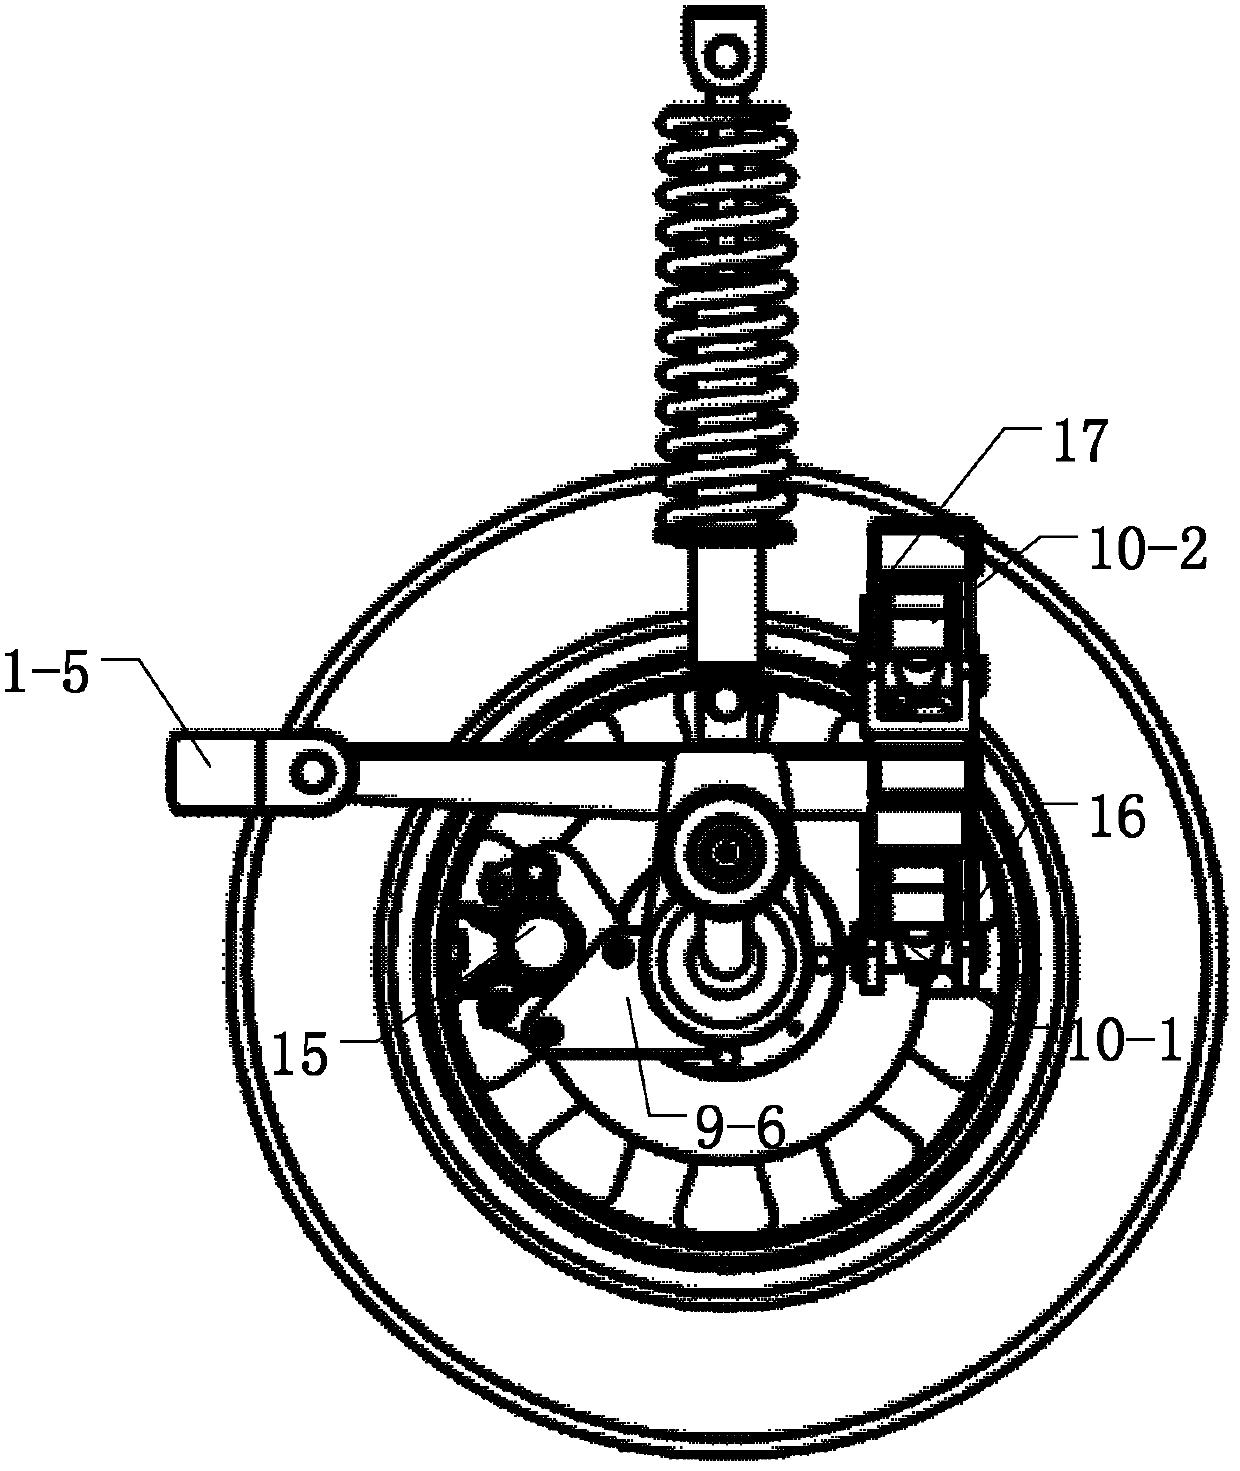 Suspension system for unmanned vehicle